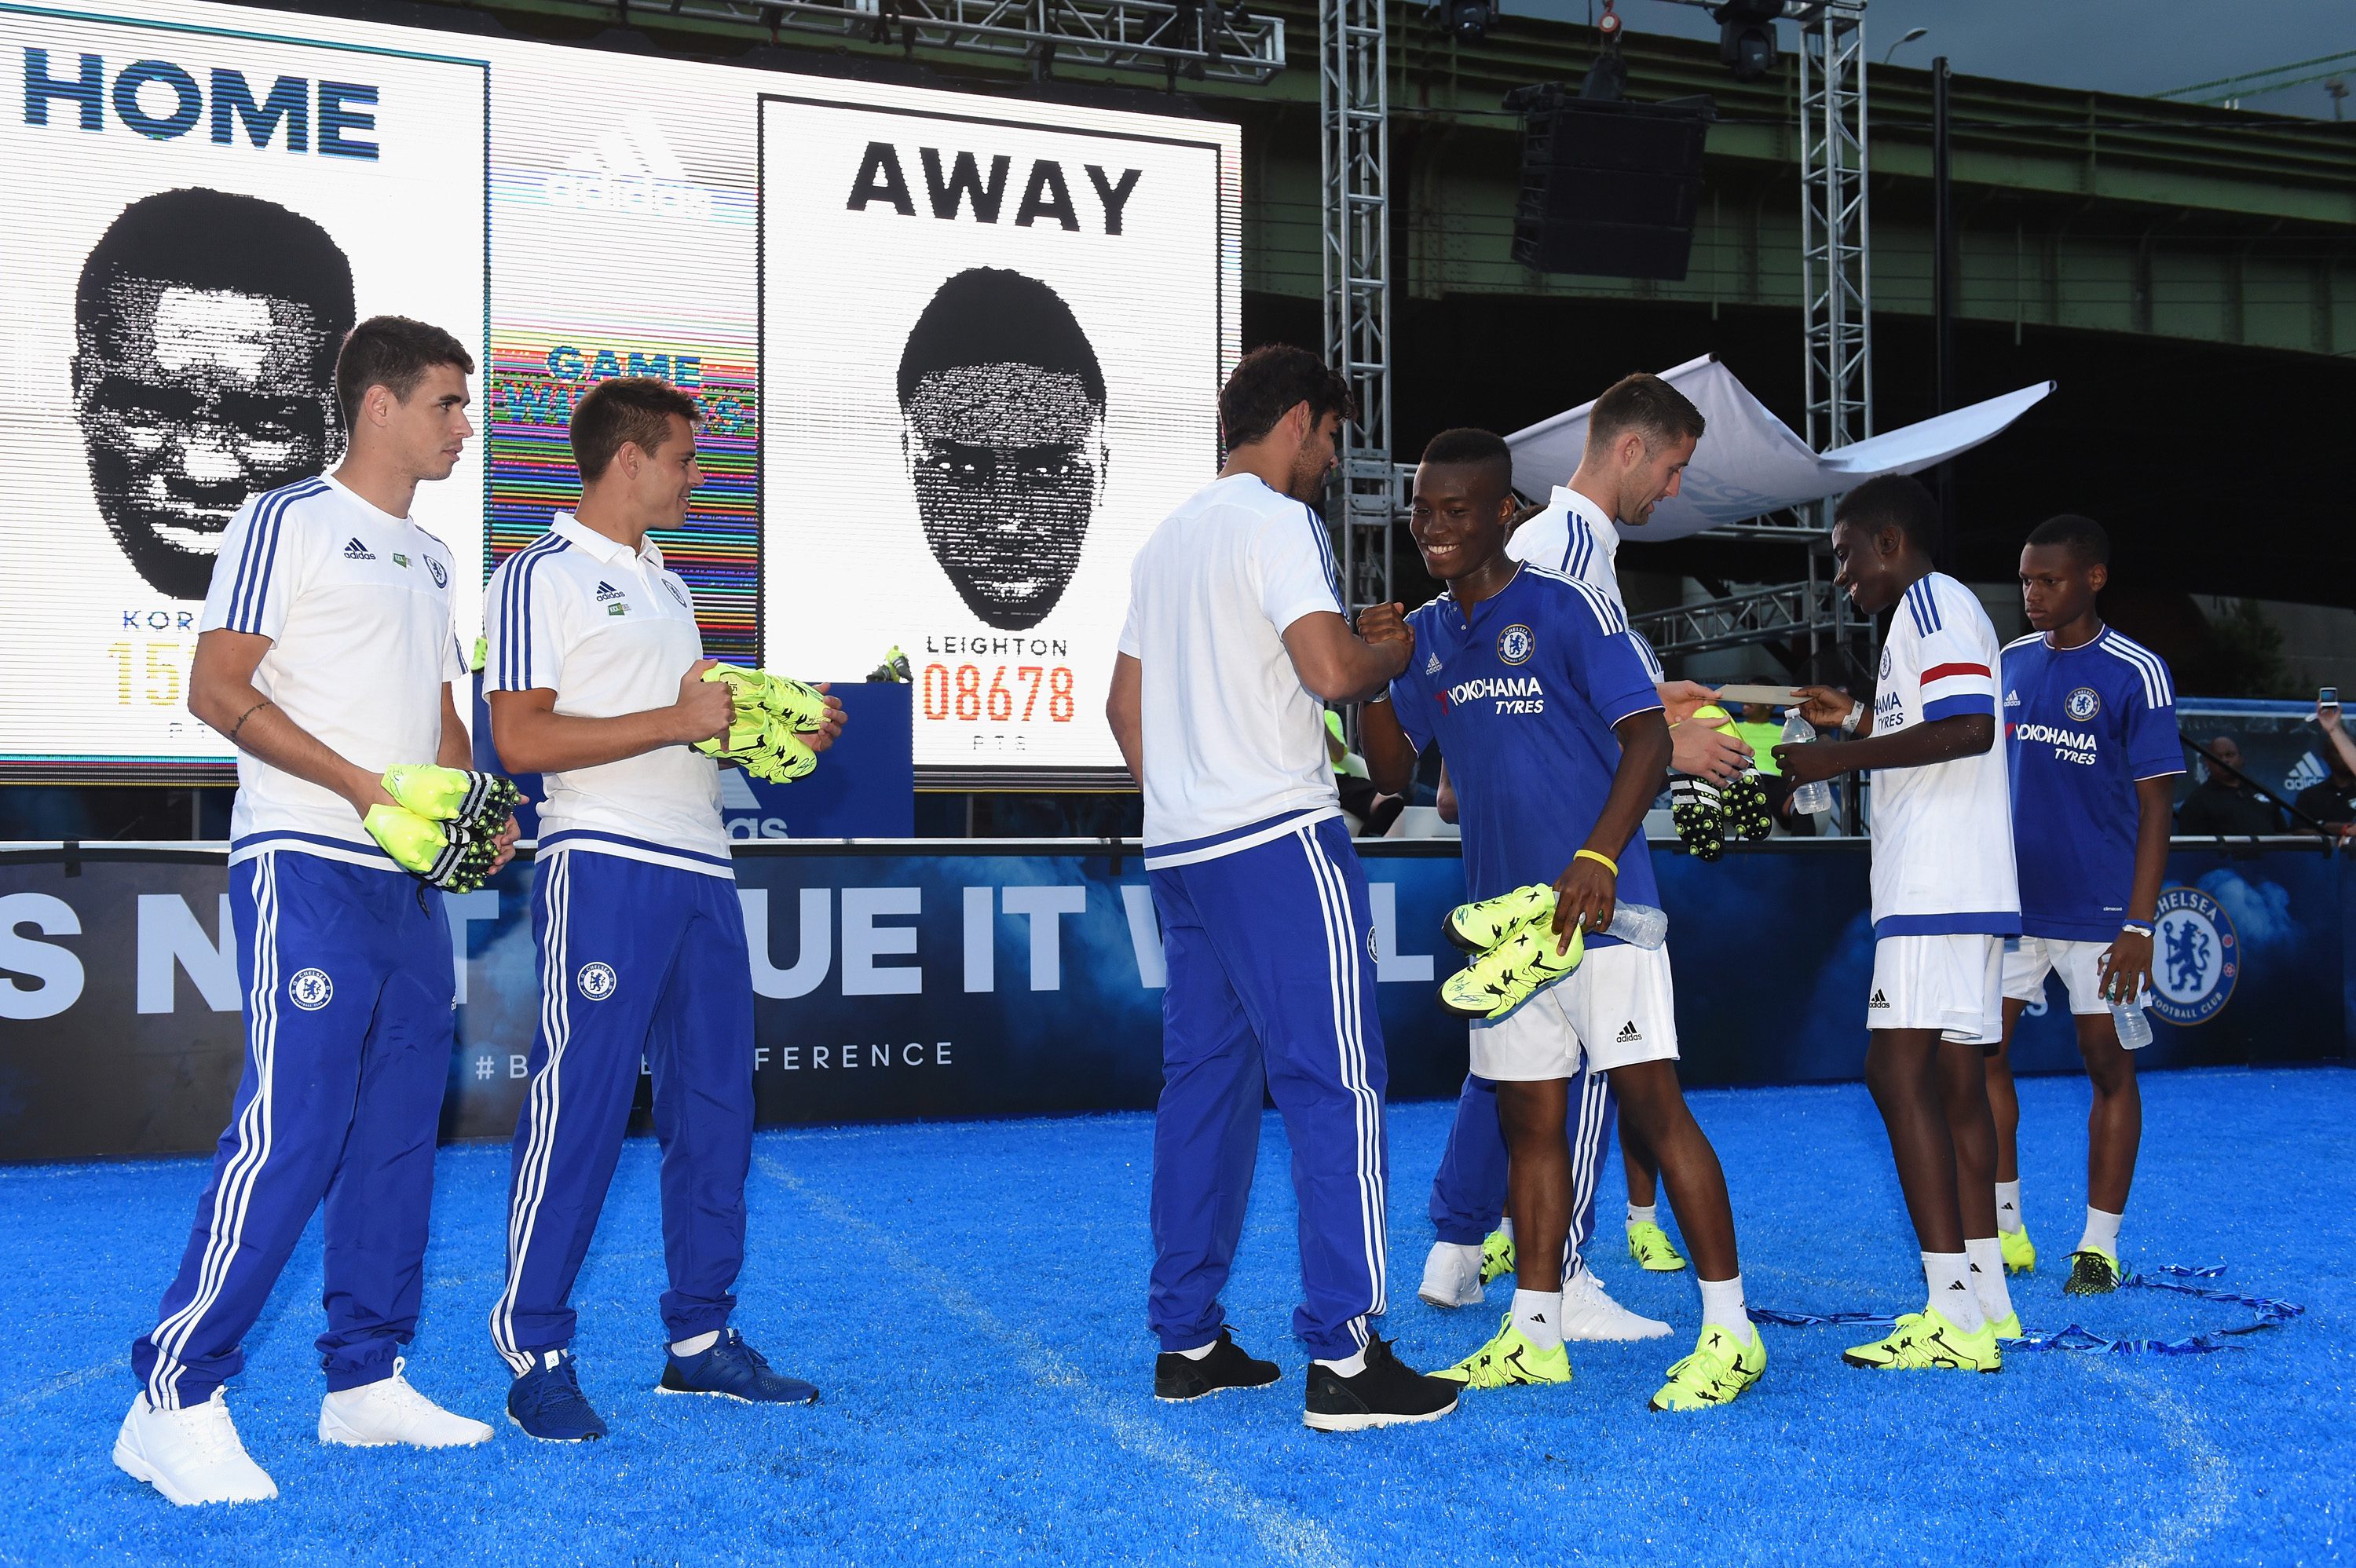 Chelsea's Gary Cahill, Oscar, Diego Costa, Cesar Azpilicueta during the Adidas Be The Difference Event on 21st July 2015 at the FC Harlem Training Ground in Harlem, New York, USA.